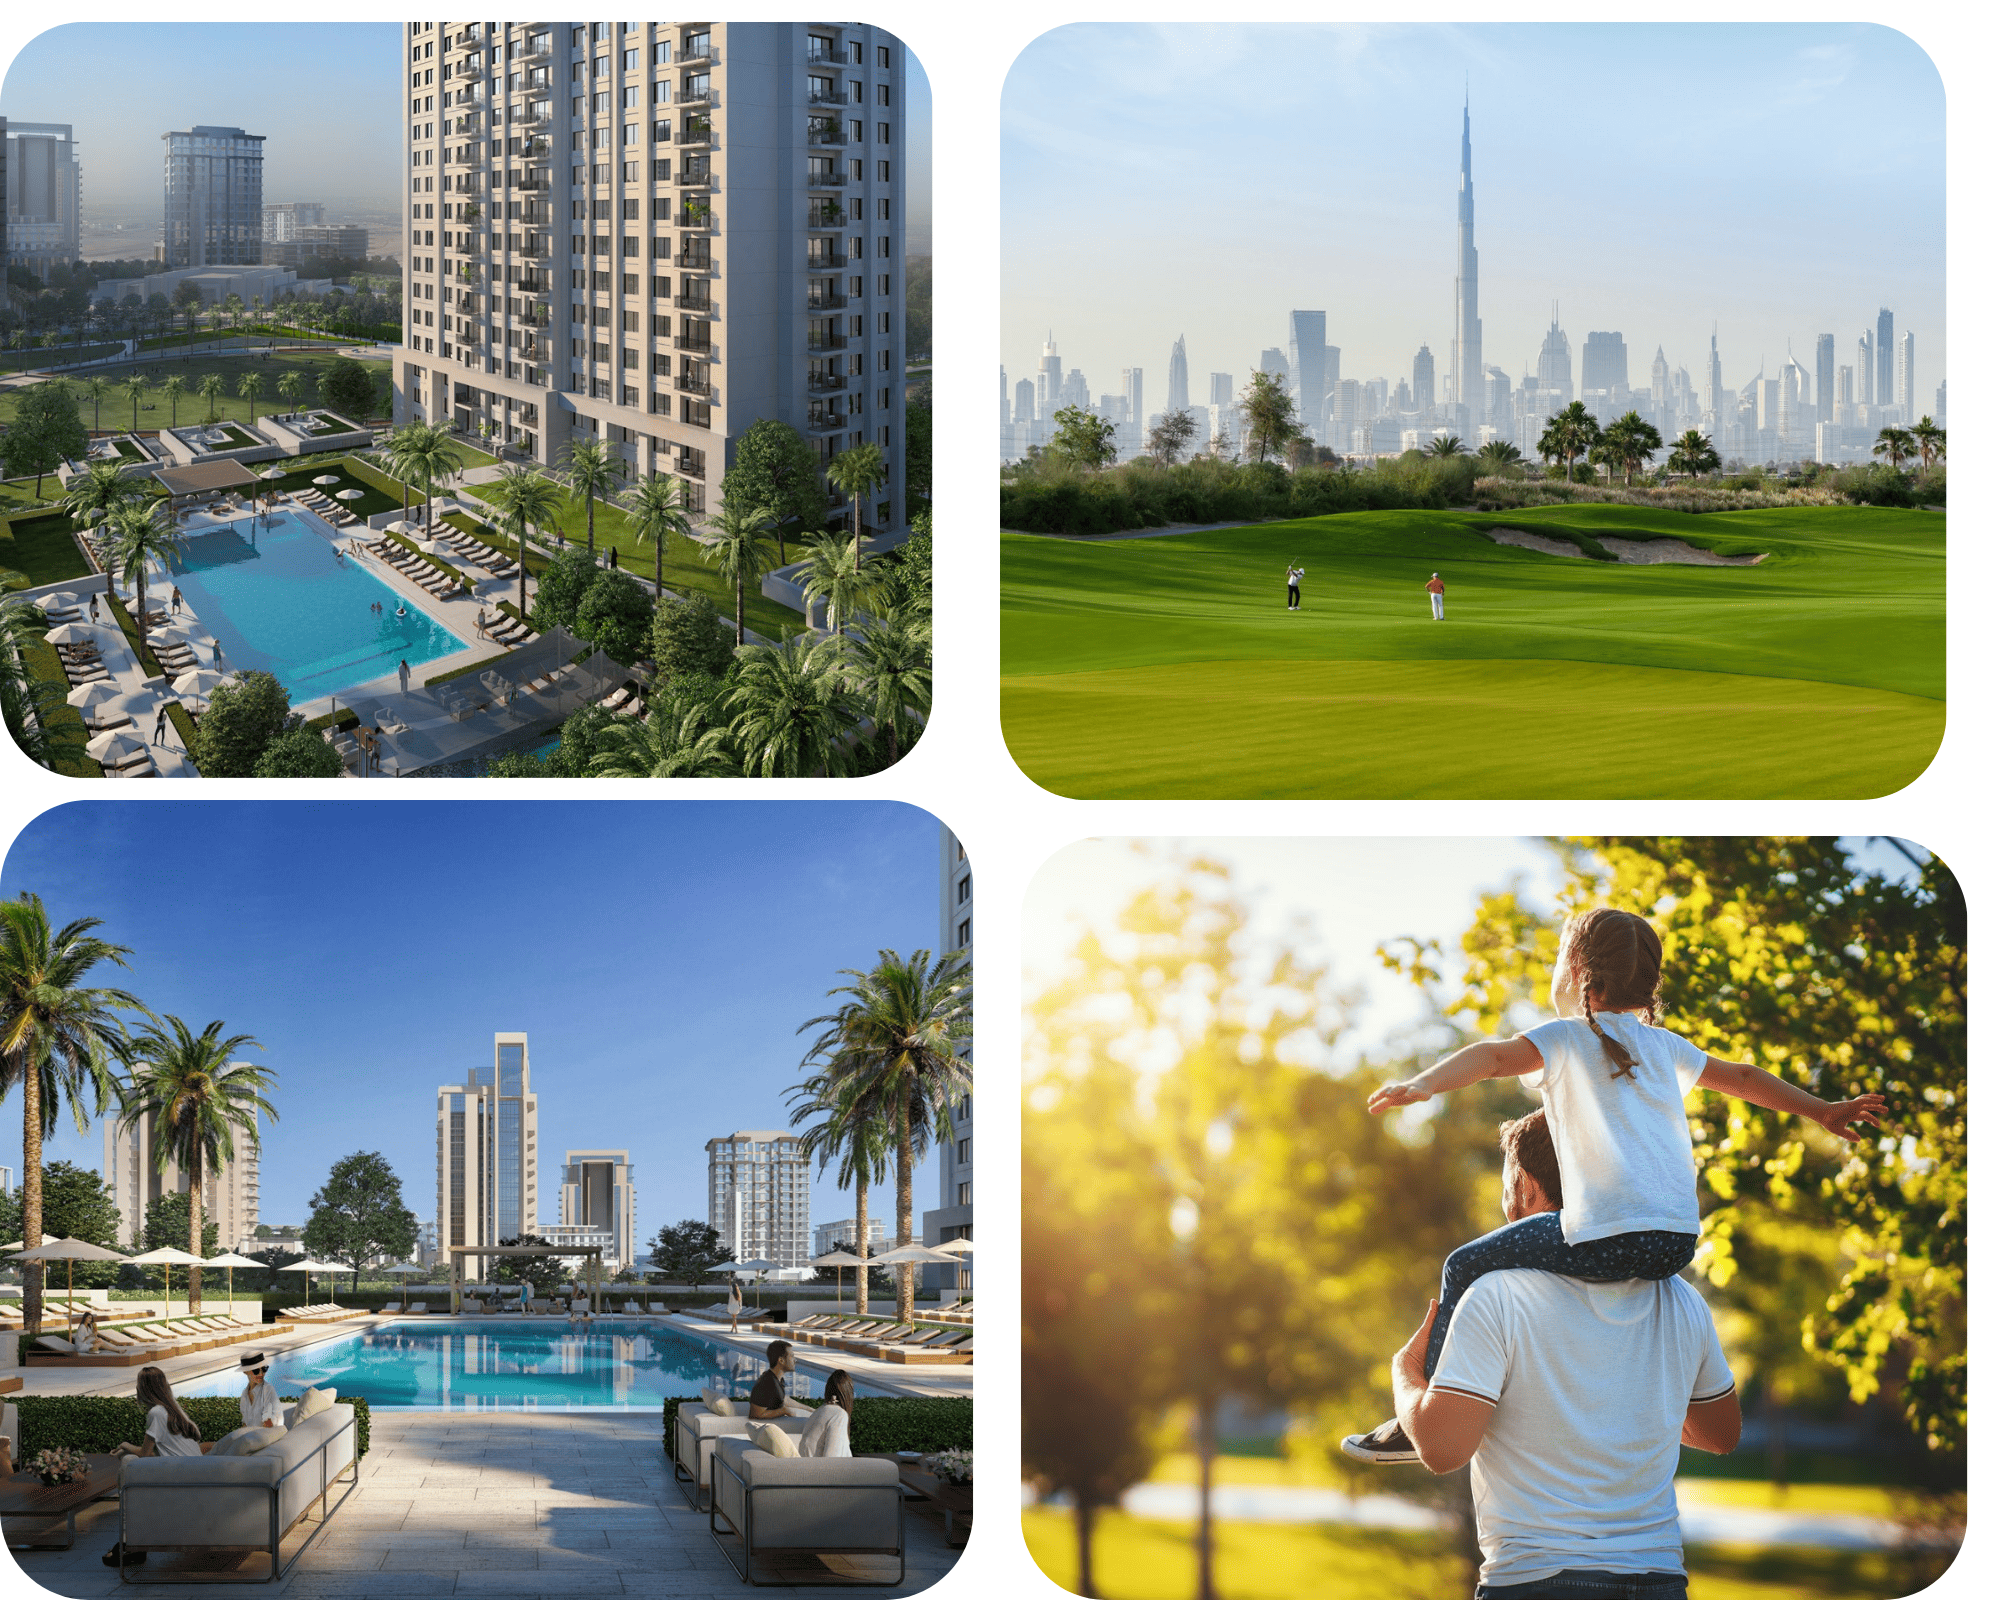 latest-project-in-dubai-lime-gardens-by-emaar-for-sale-in-dubai-hills-estate